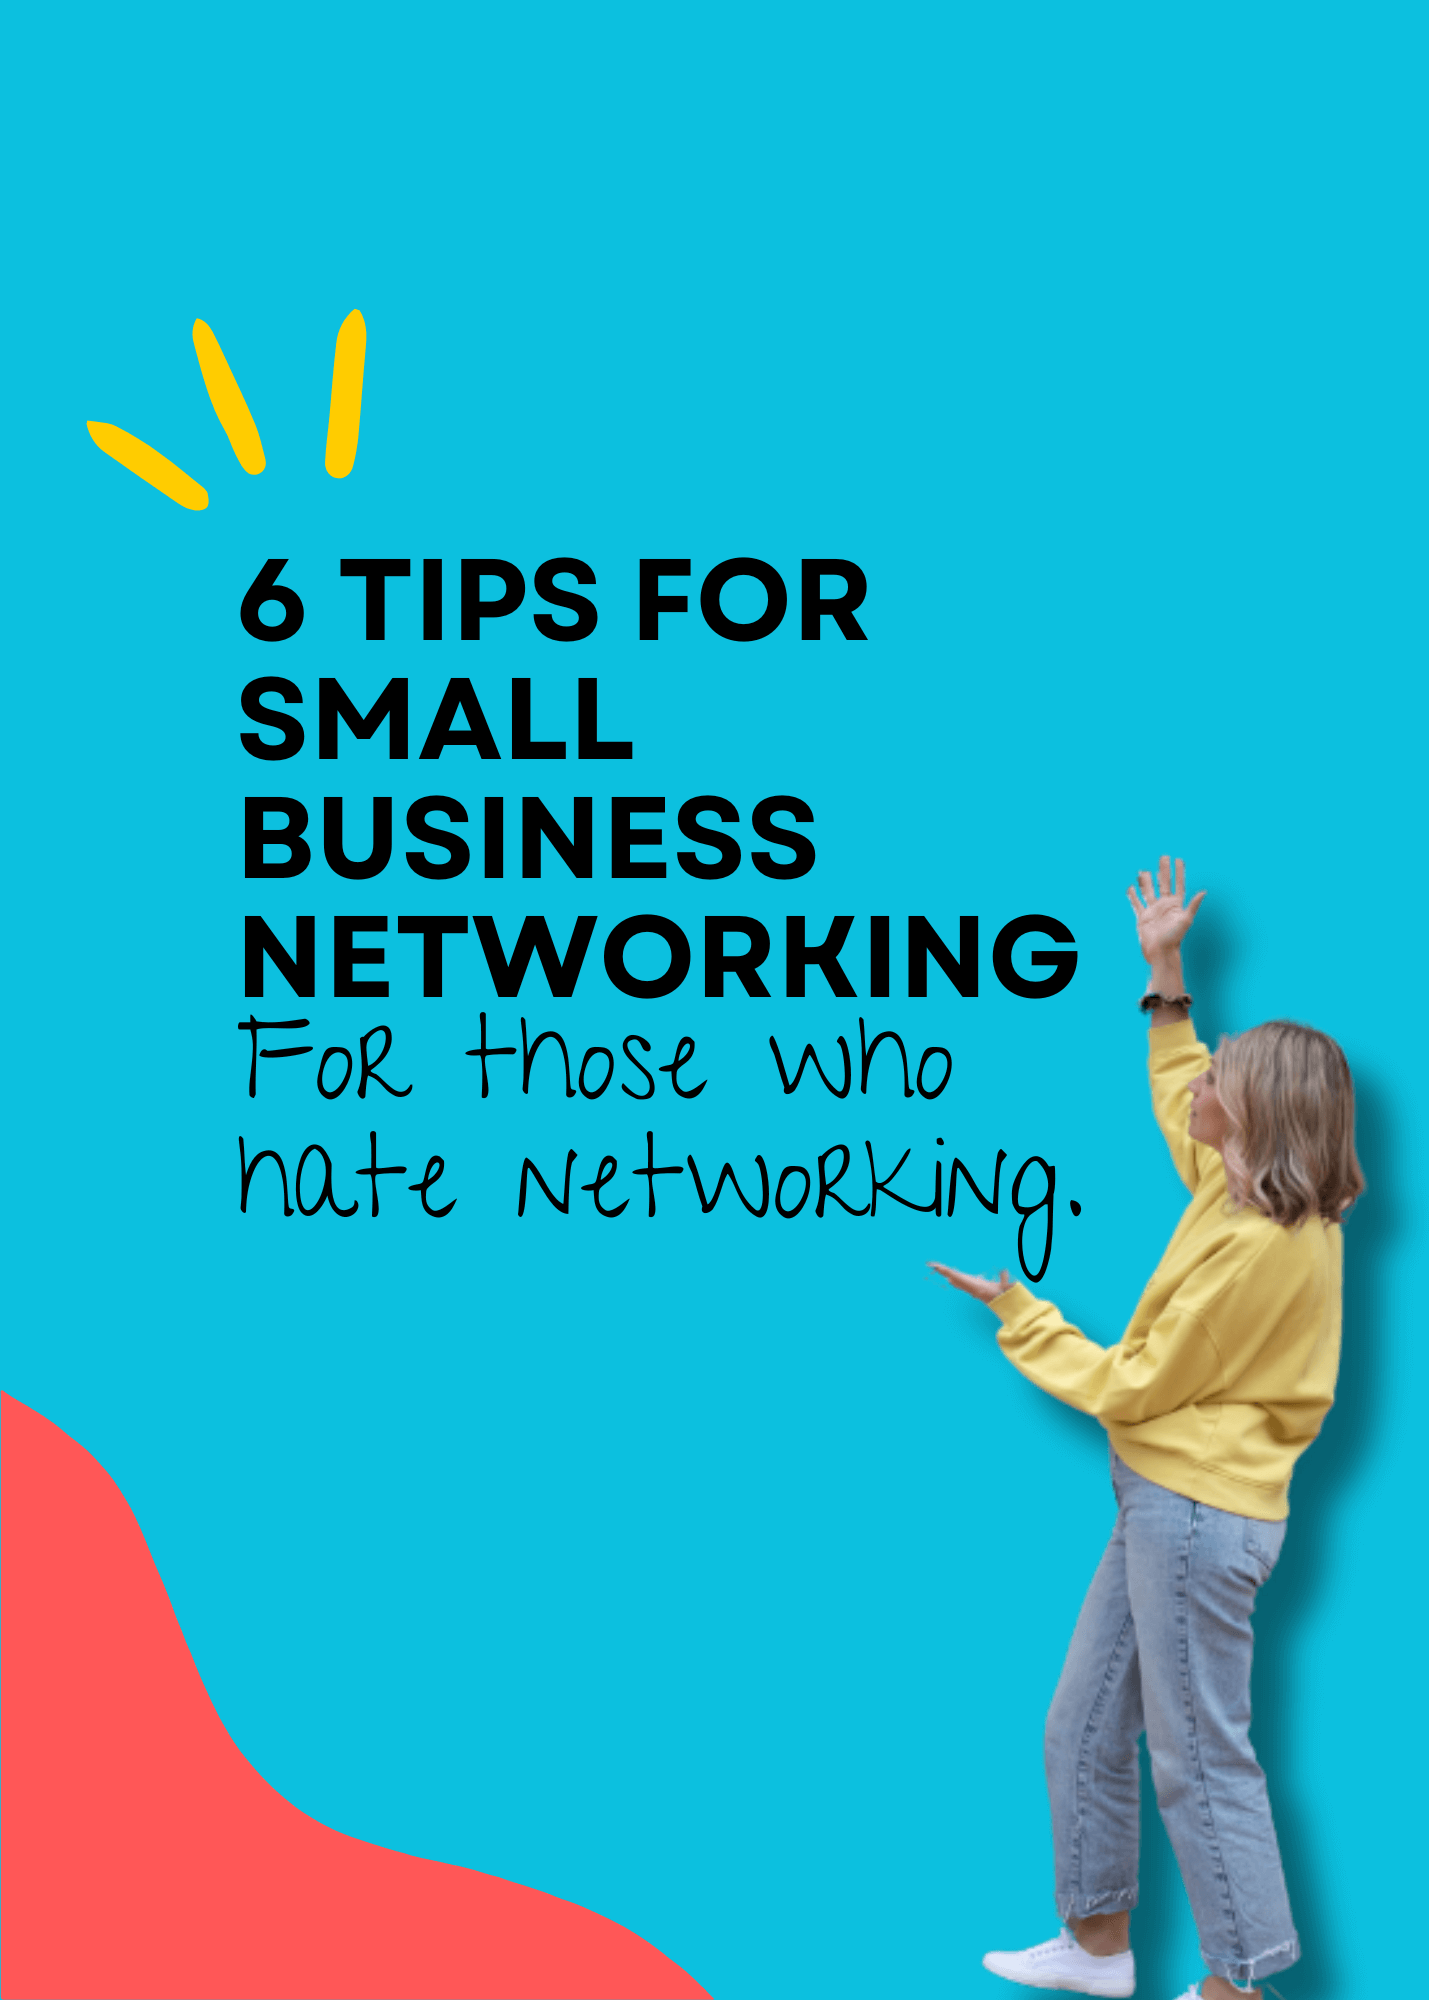 6 tips for small business networking for those who hate networking